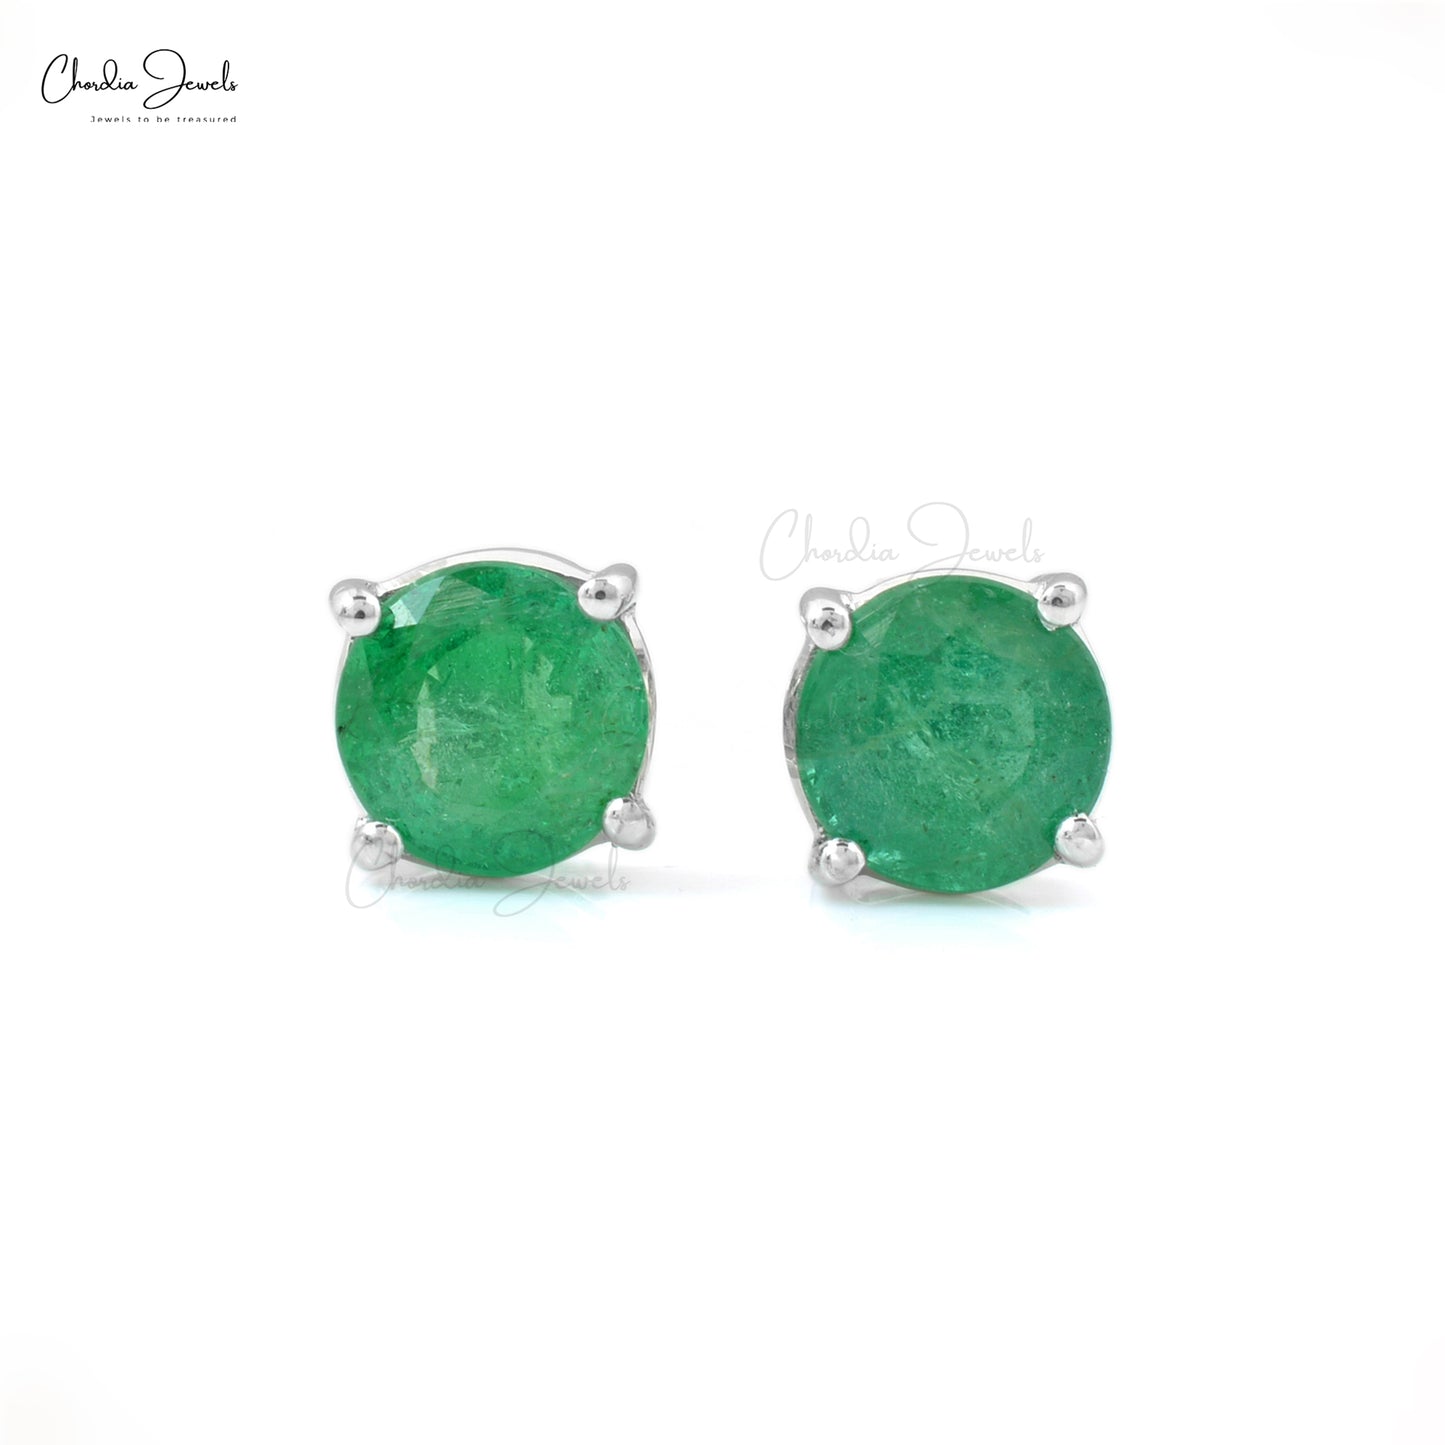 Genuine Emerald 14k Solid White Gold Stud Earrings 6mm Round Cut Gemstone Antique Art Deco Earrings For May Birthstone